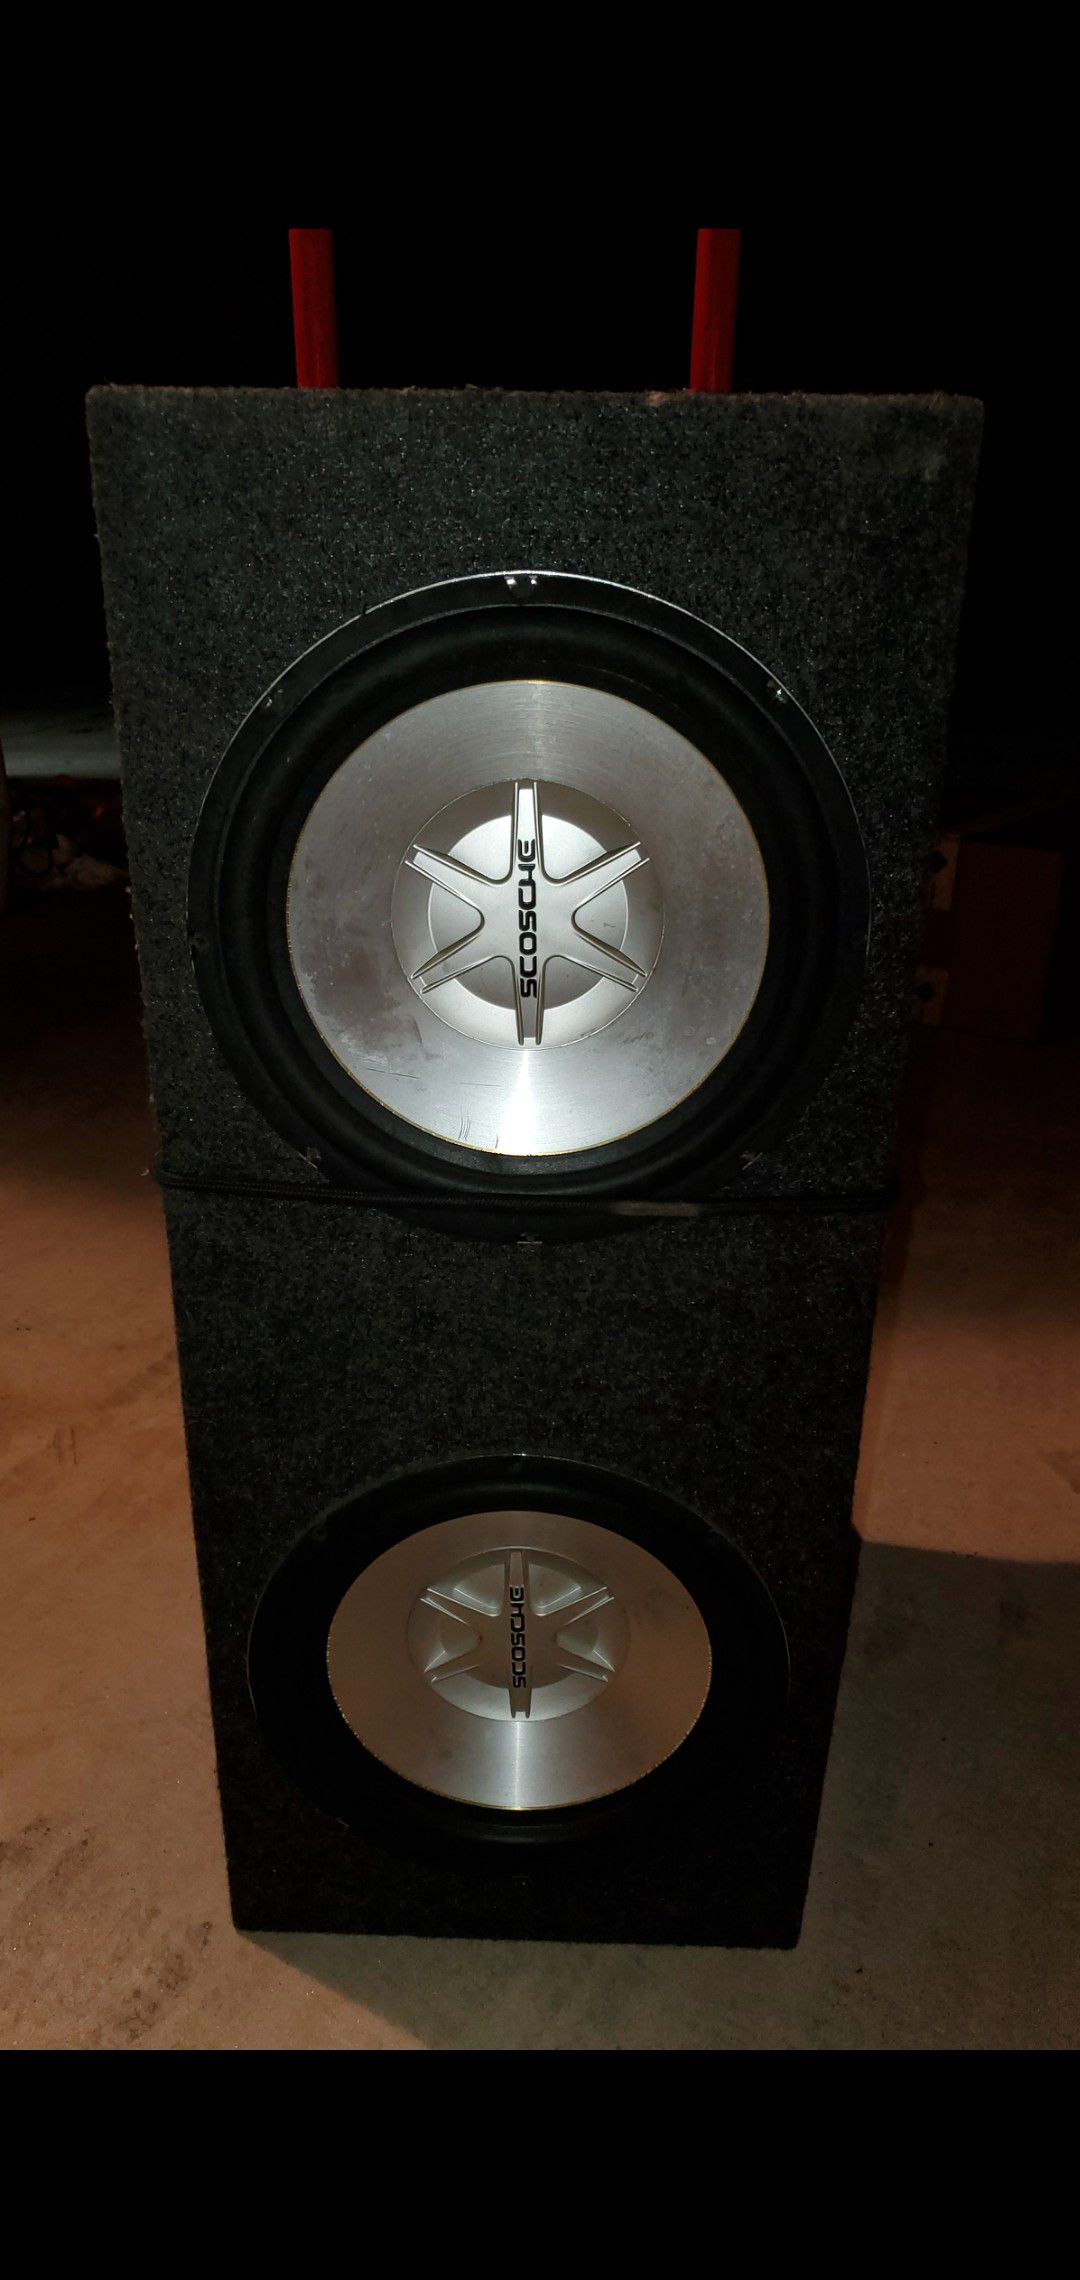 SCOSCHE SPEAKERS & BOX, (2) 12" They were in my Explorer, IT ALL WORKS & SOUNDS GREAT, EVERYTHING for $175, .....OBO, ITS IN MY WAY